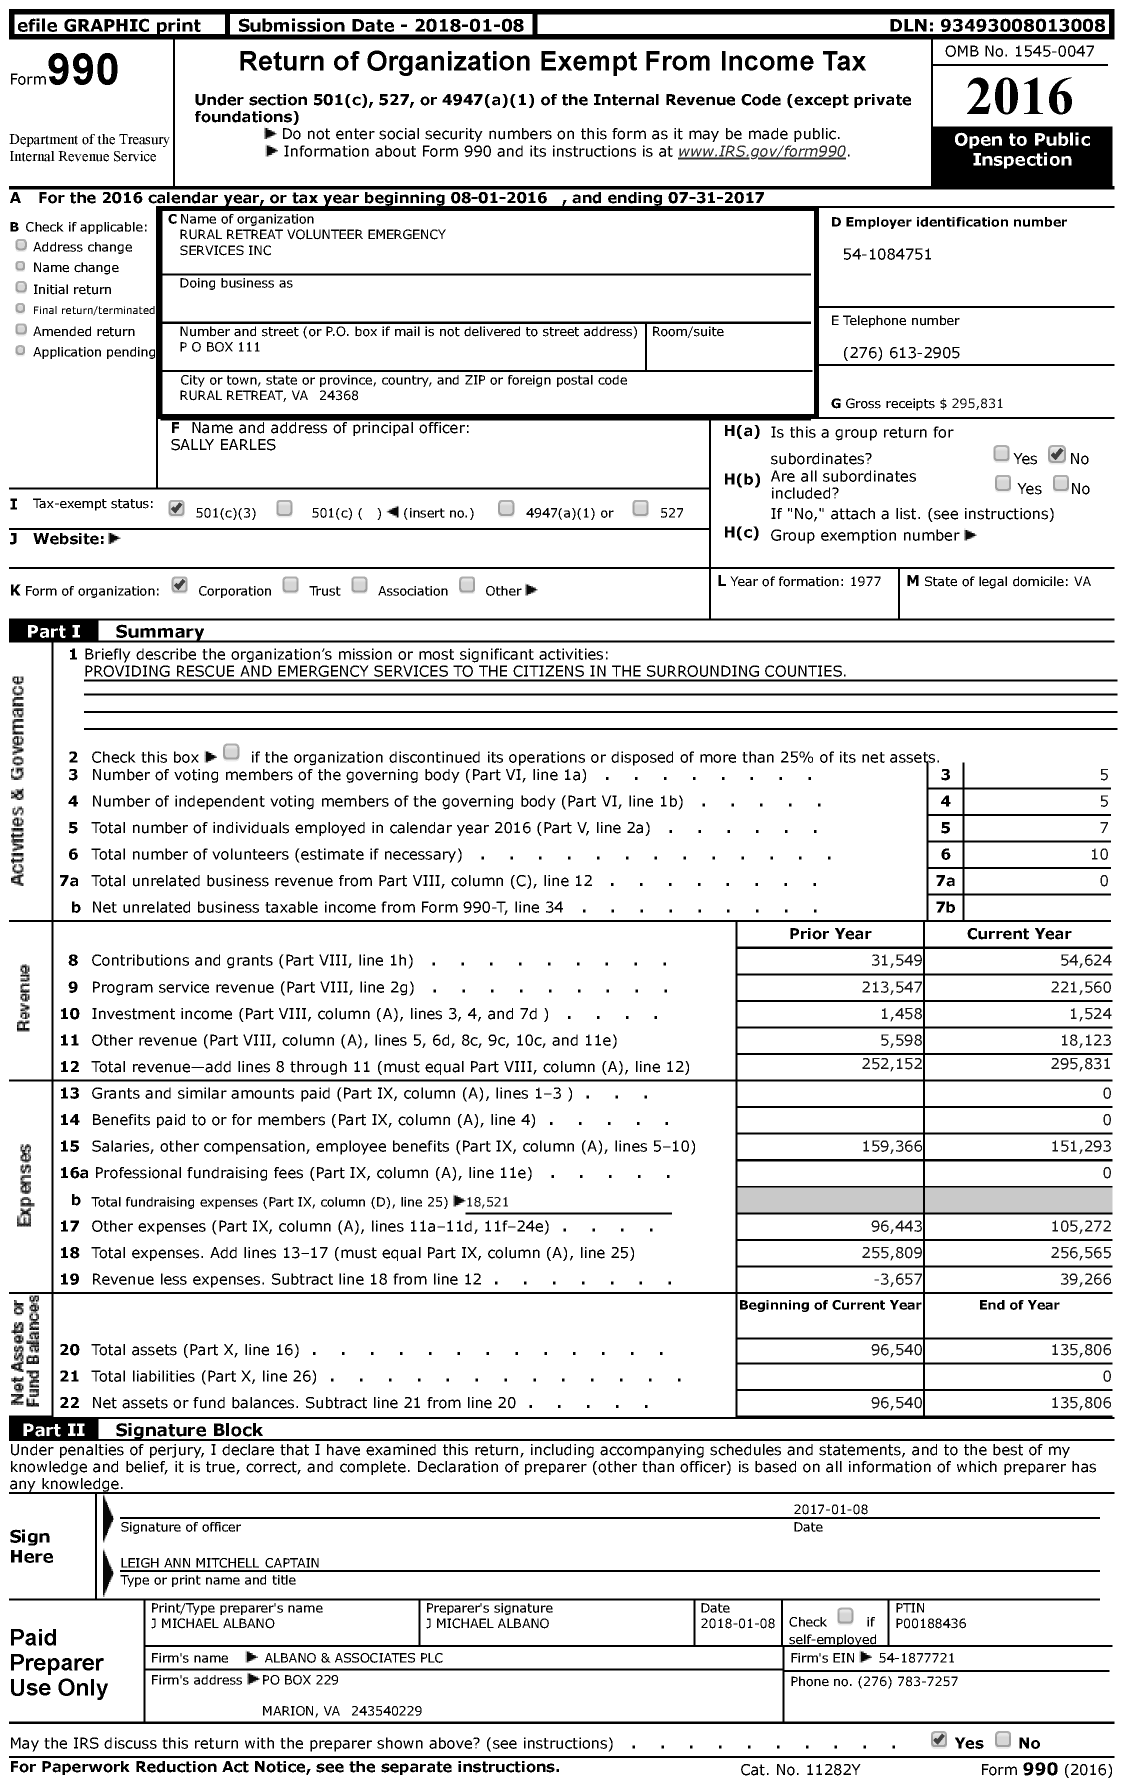 Image of first page of 2016 Form 990 for Rural Retreat Volunteer Emergency Services